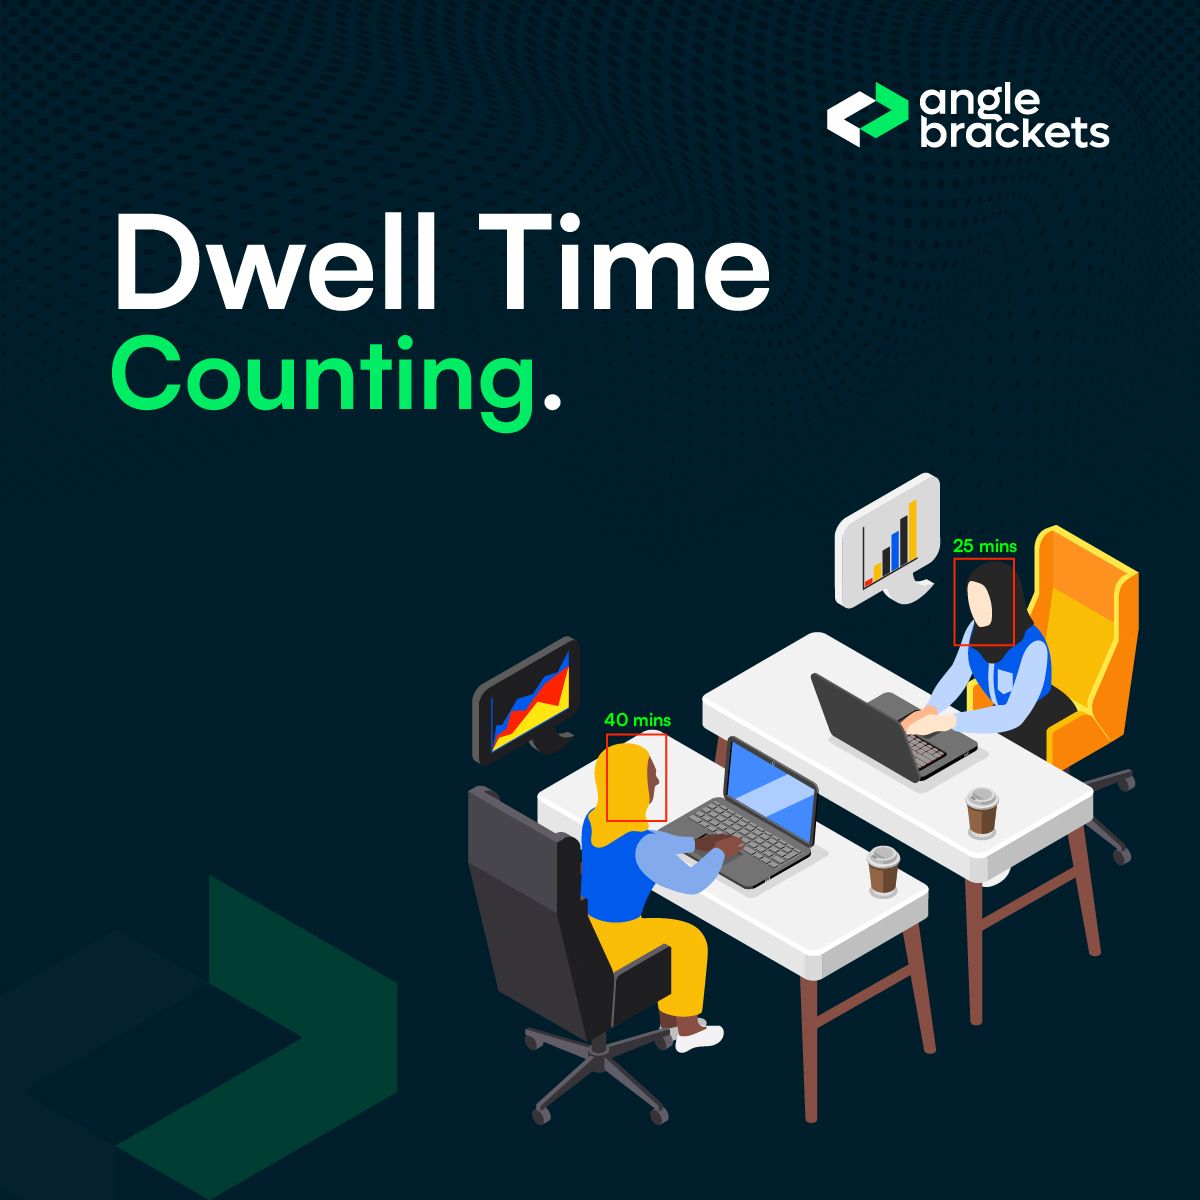 Dwell time counting